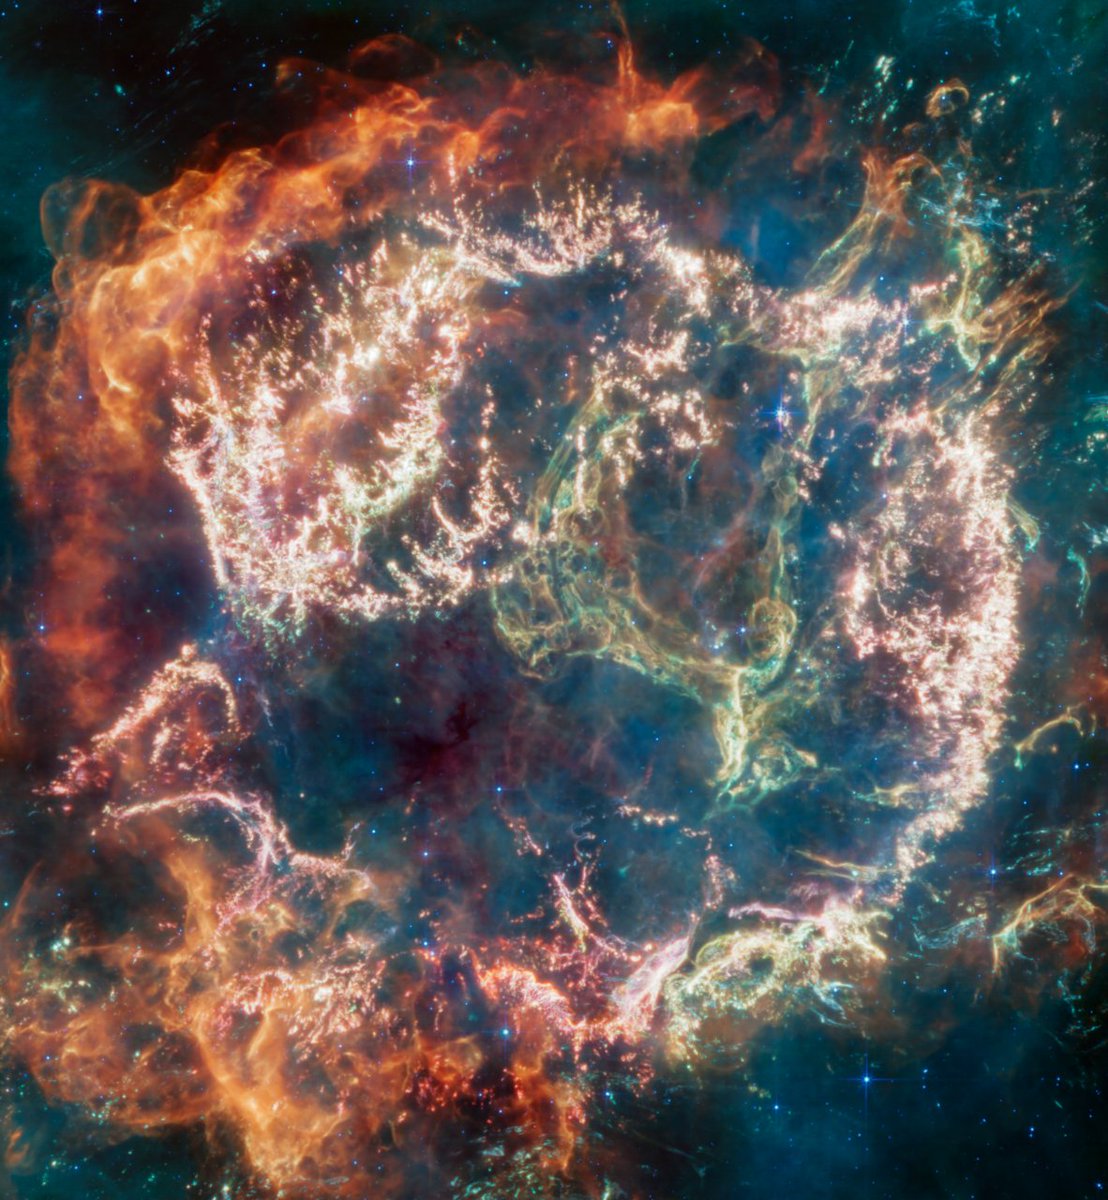 Su-su-su-supernova 💥 

Supernovae like the one that formed Cas A (shown here) are crucial for life as we know it. They spread elements like the calcium in our bones and the iron in our blood across space, seeding new generations of stars and planets: go.nasa.gov/44KdDcA